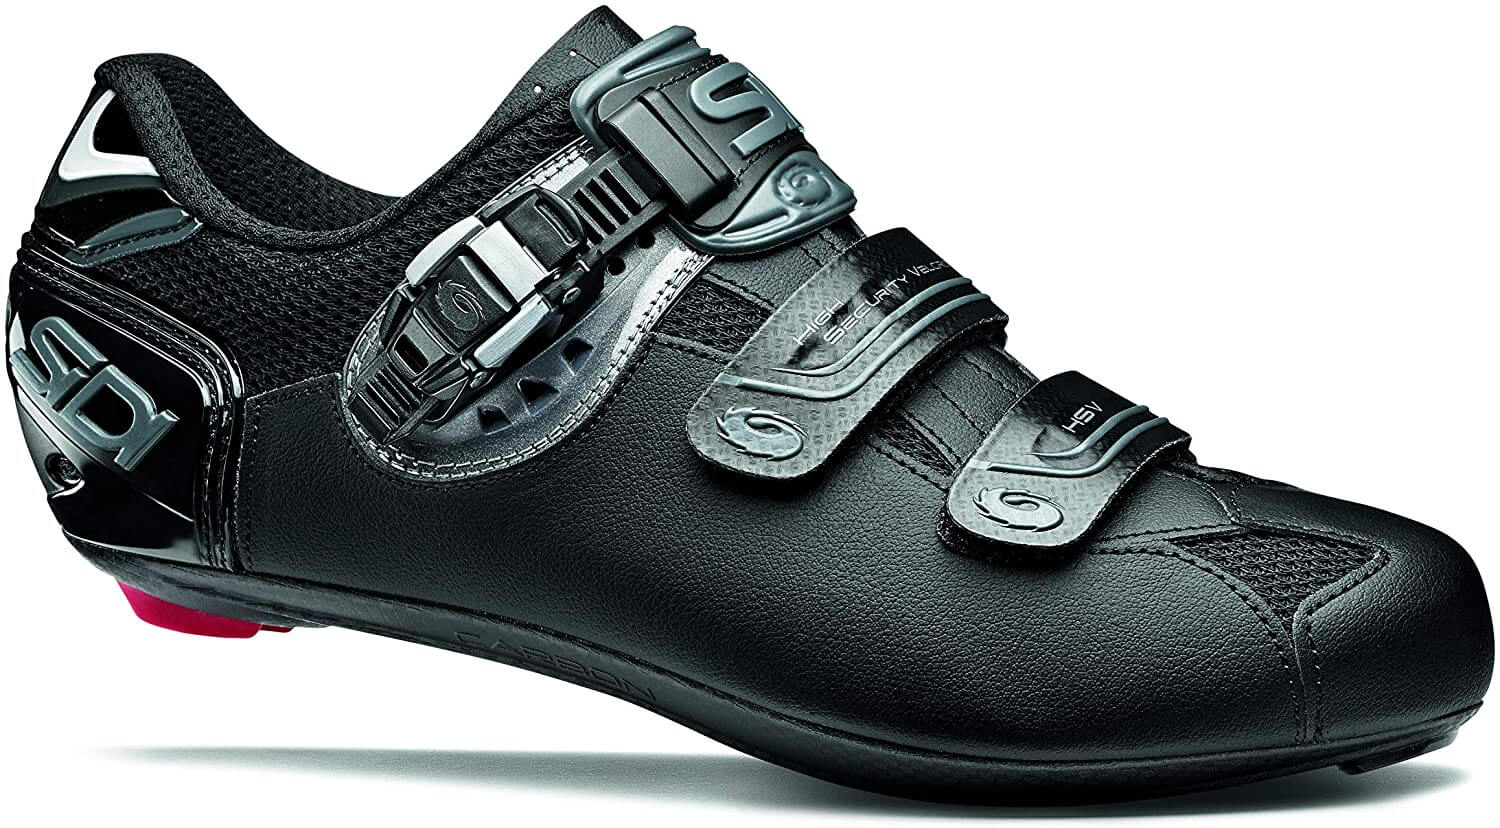 Best road cycling shoes for wide feet